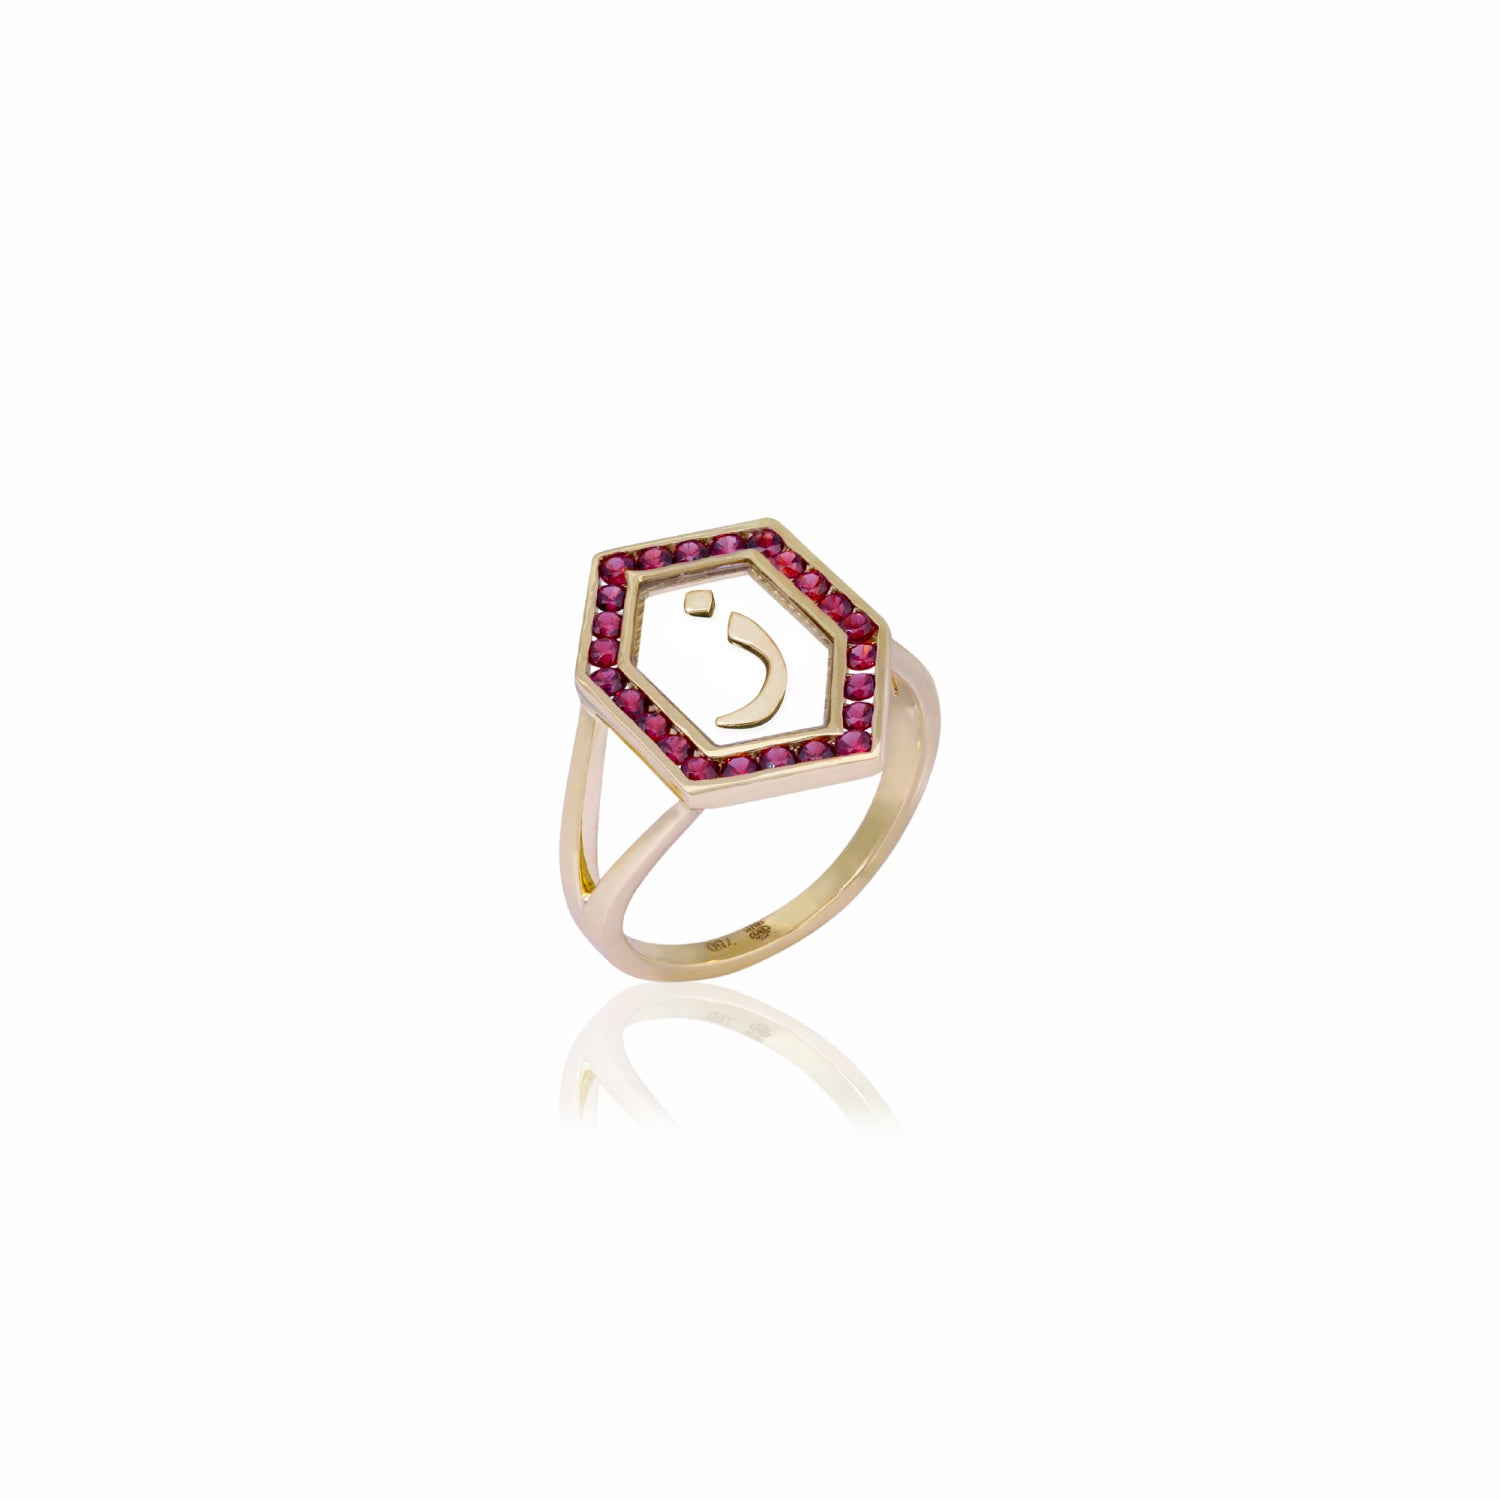 Qamoos 1.0 Letter ز Ruby Ring in Yellow Gold